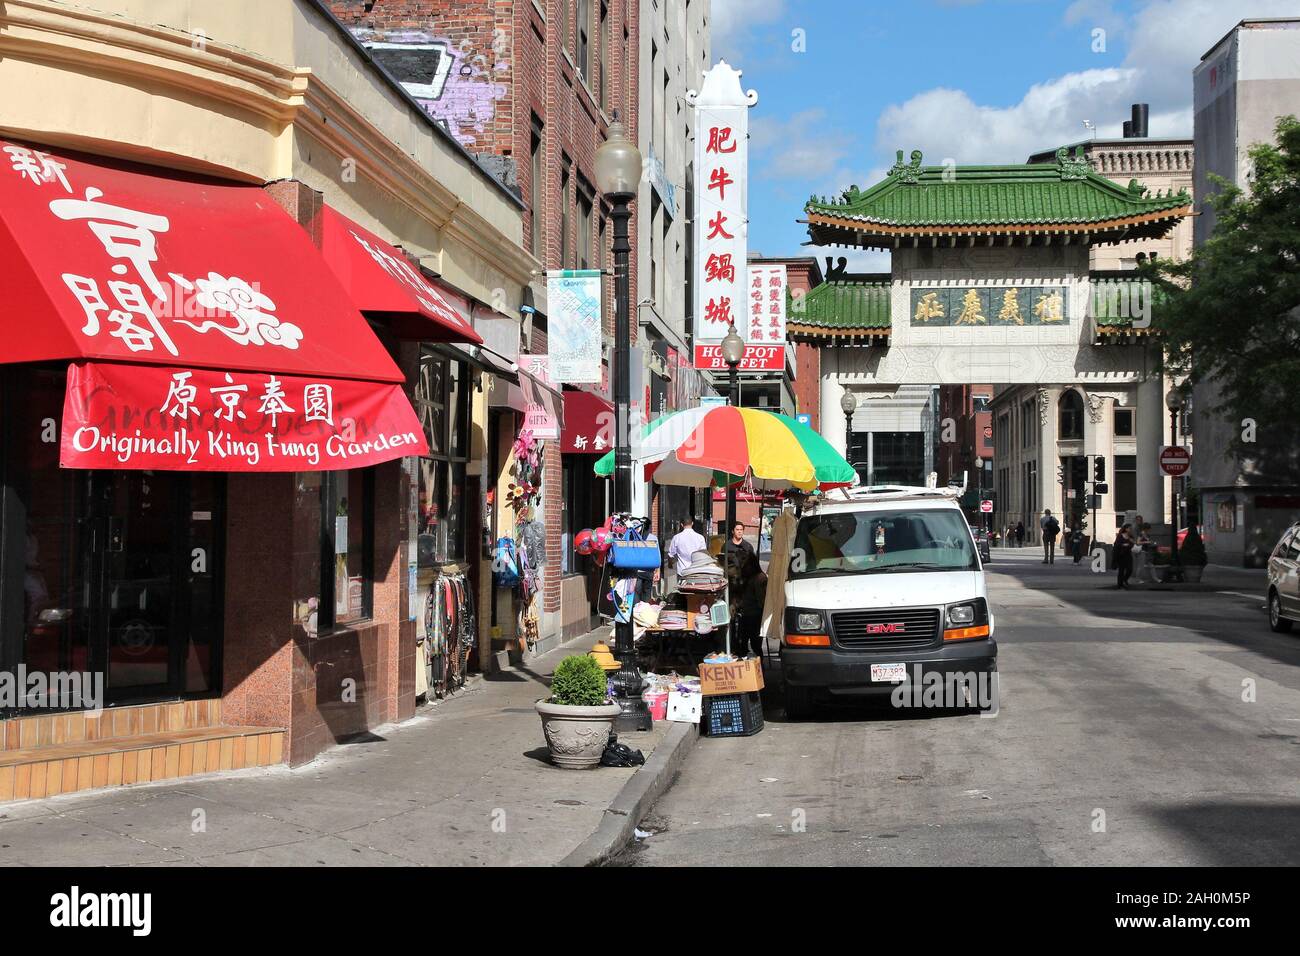 BOSTON, USA - JUNE 8, 2013: People visit Chinatown in Boston. Boston's Chinatown is the only surviving Chinatown district in New England region of Uni Stock Photo